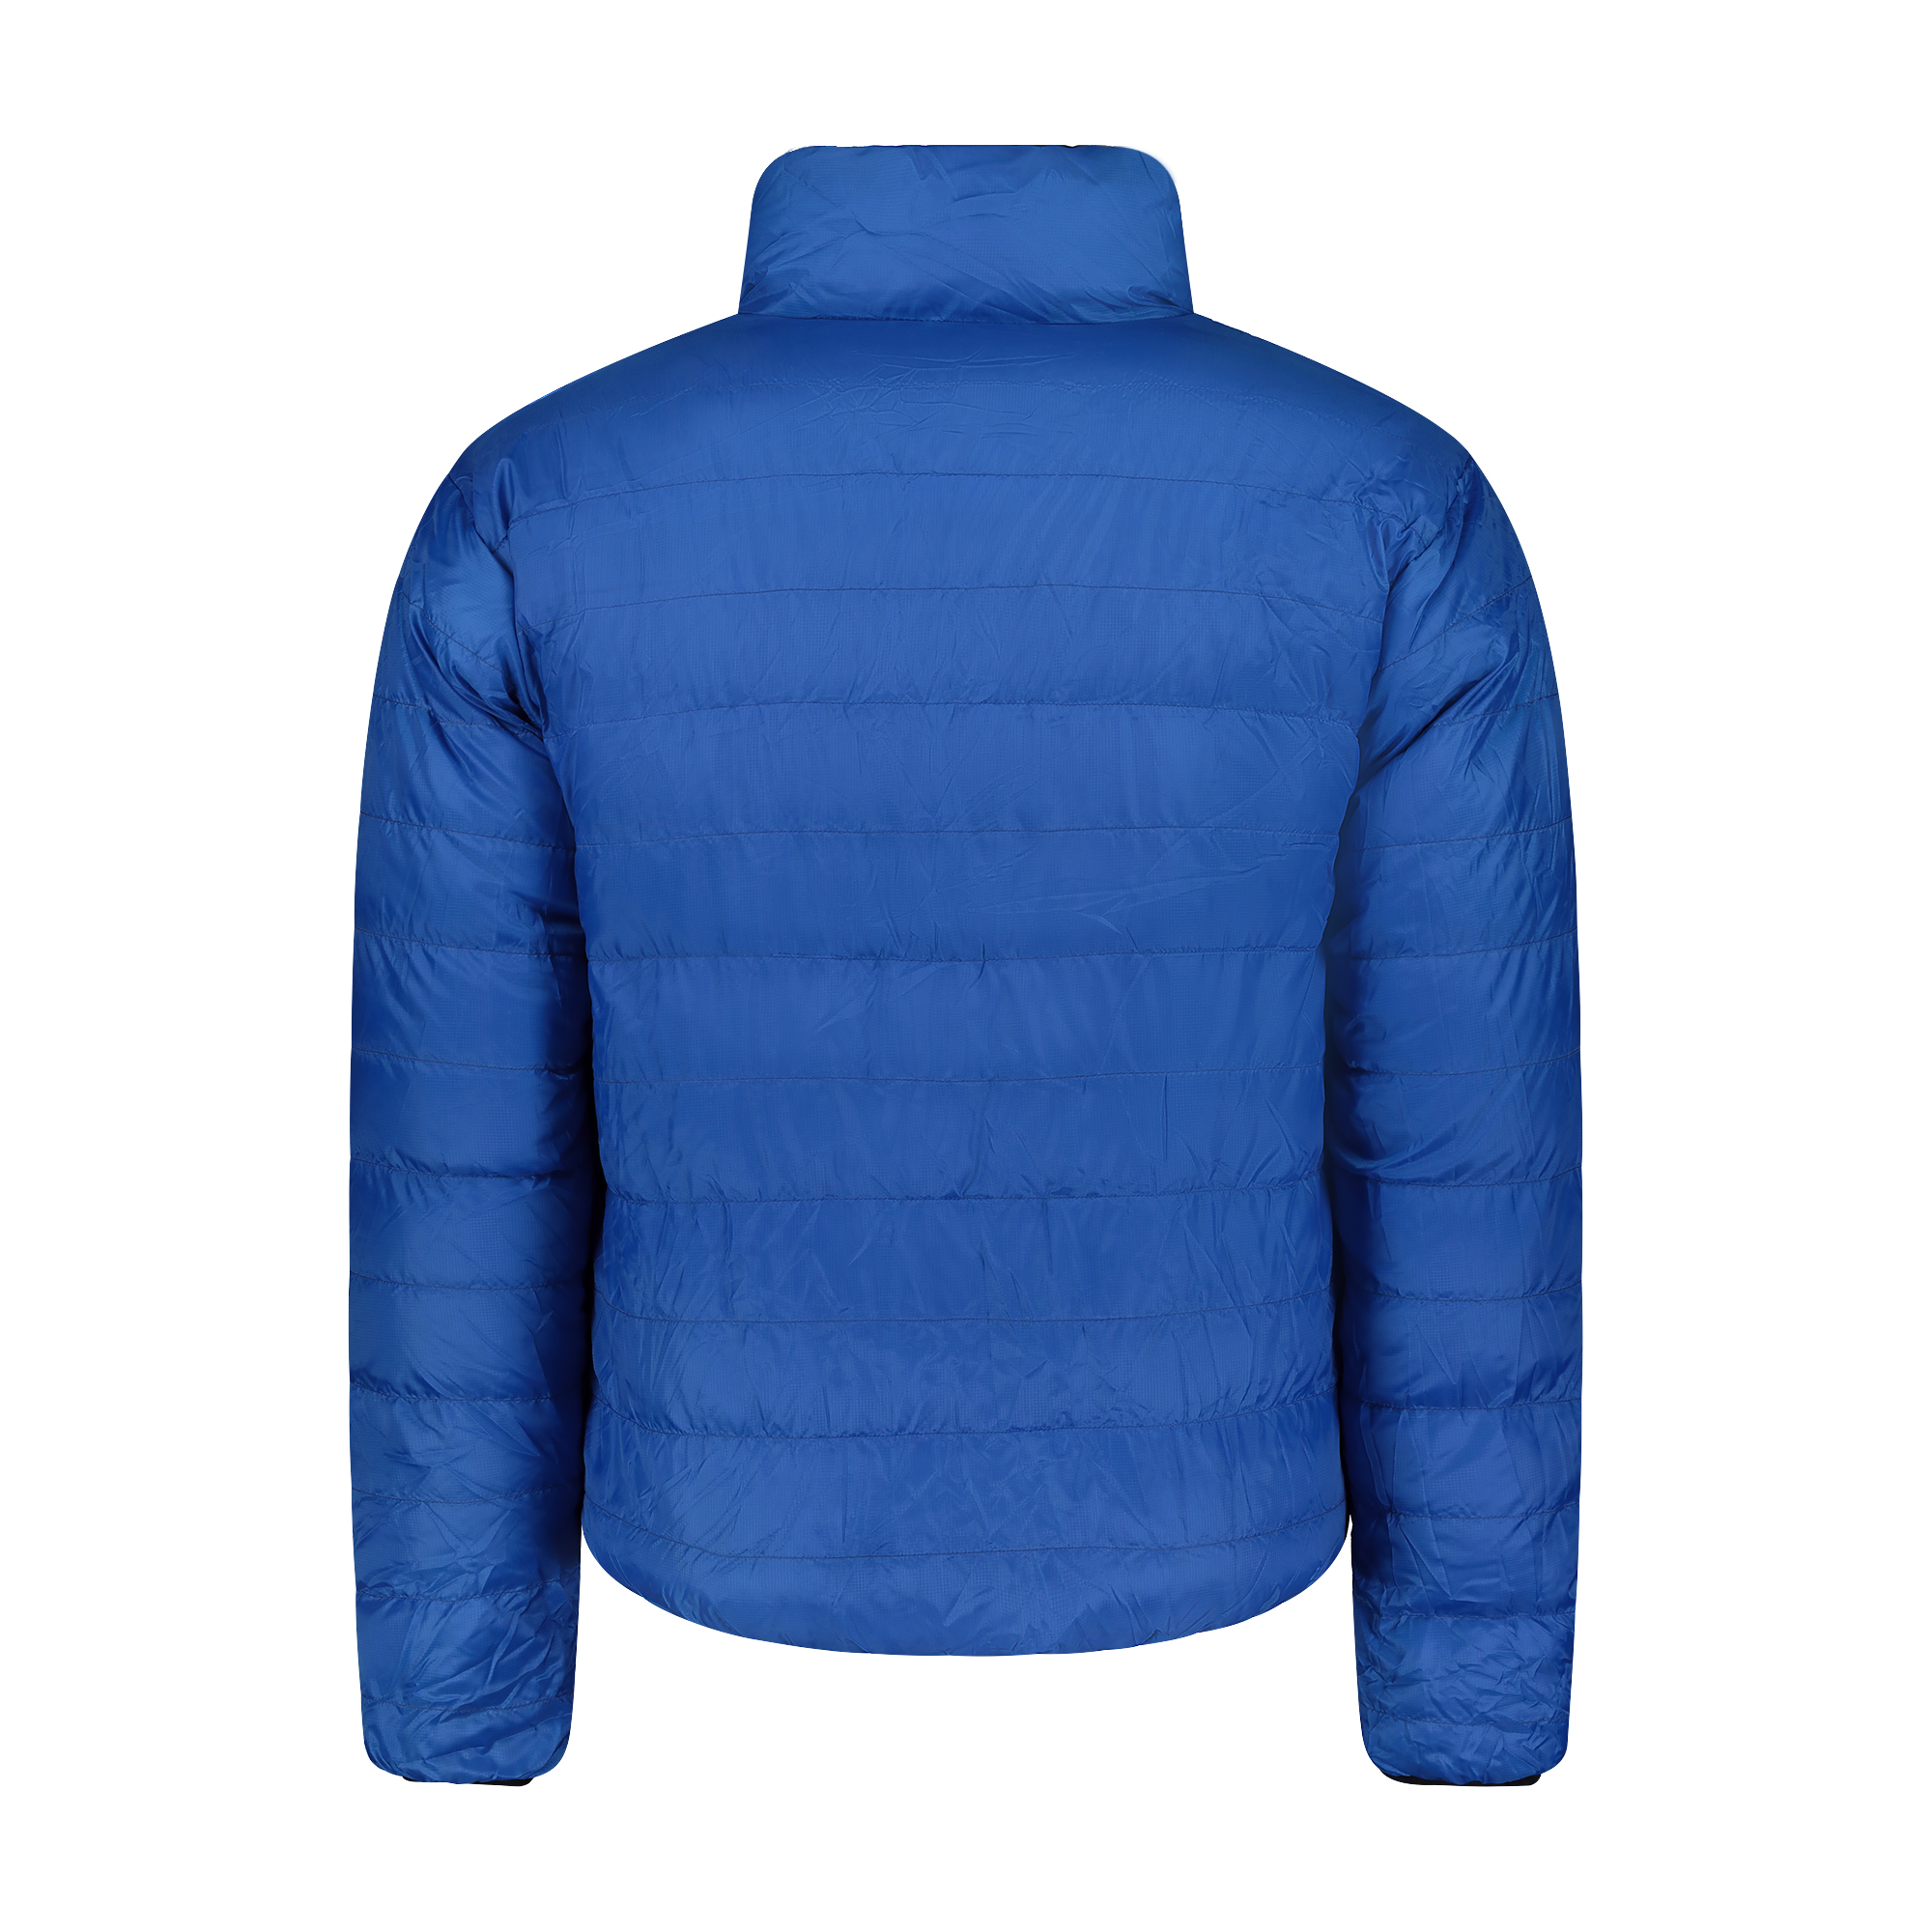 Freedom - Reversible Pure Down 700 Cuin Paragliding Jacket, without hood.